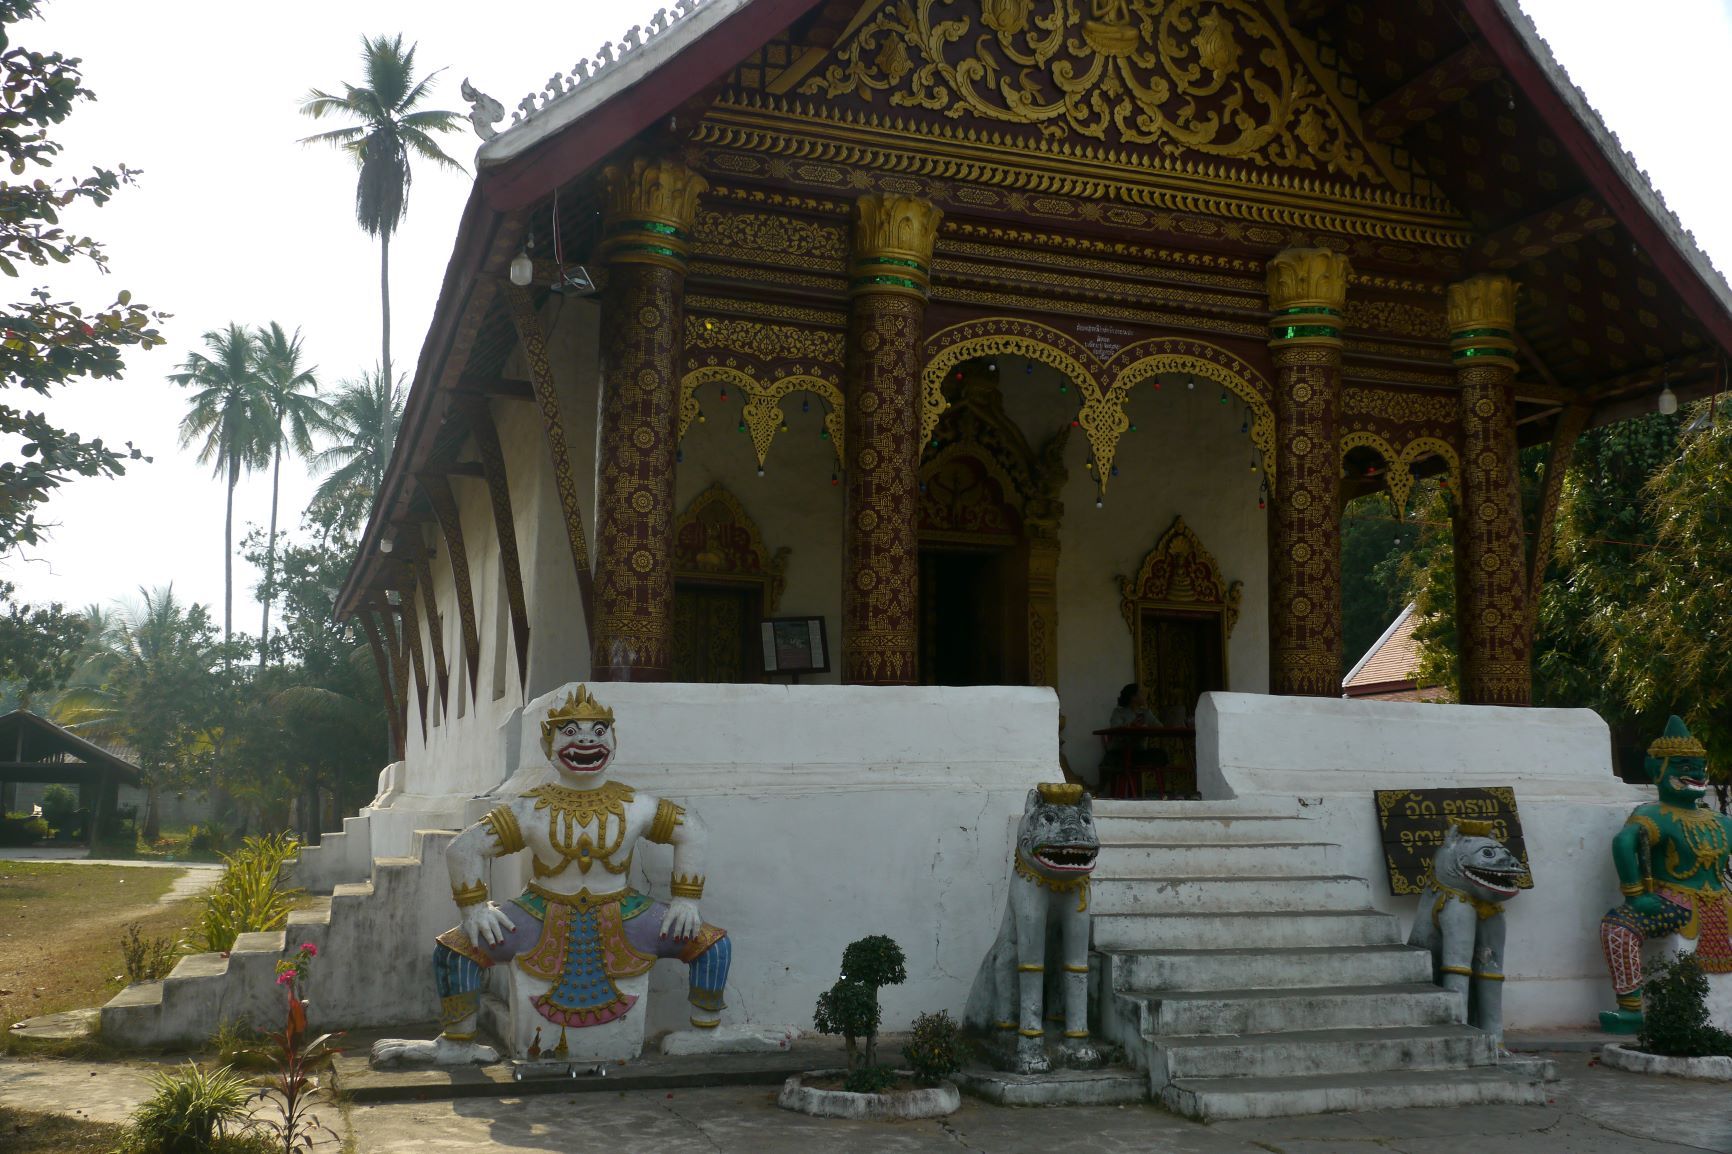 Luang Prabang - Will the Mekong's World Heritage & Biodiversity Be Damned ? by Tom Fawthrop